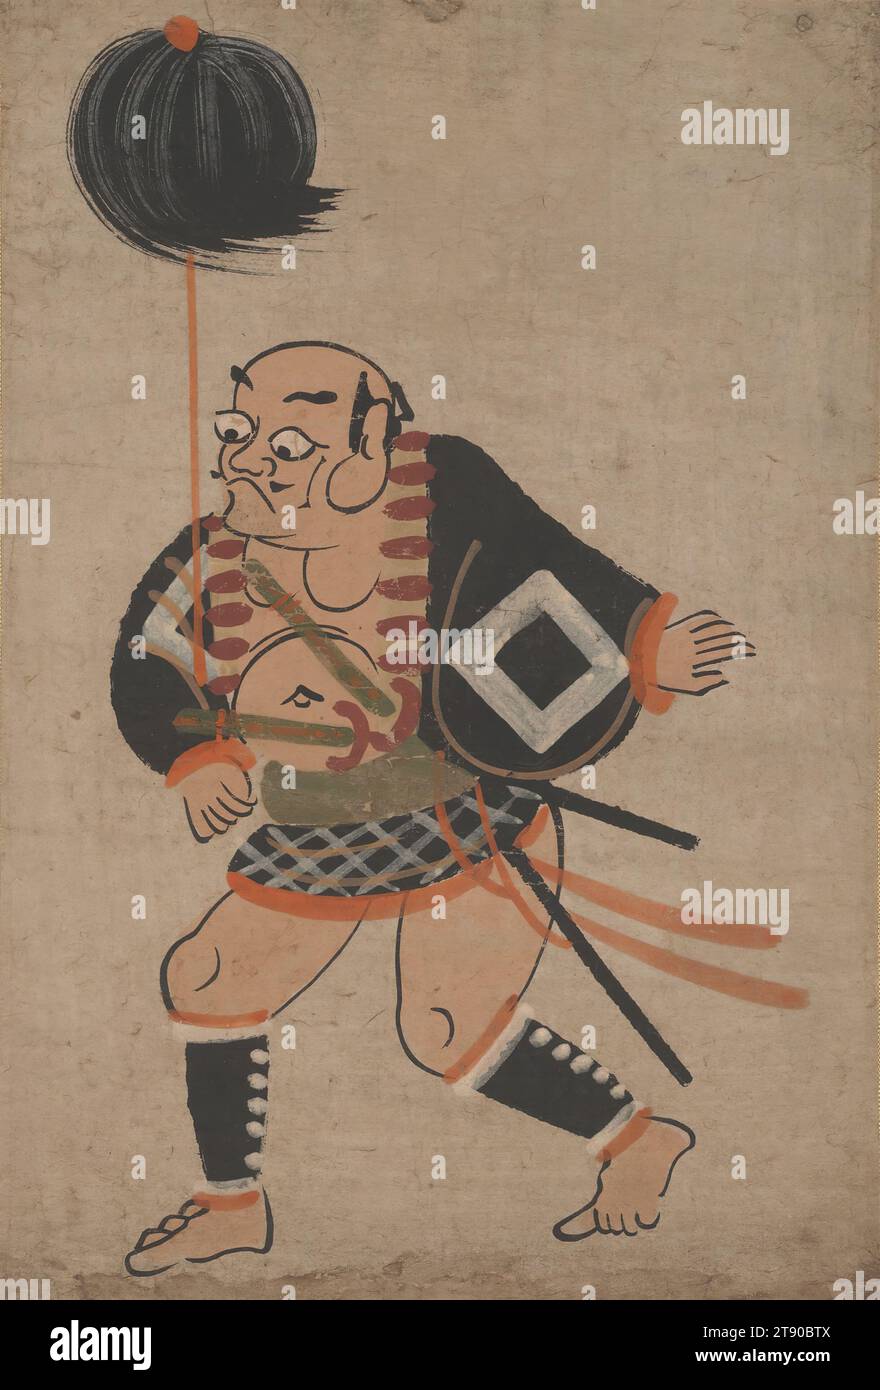 Ōtsu-e, 17th - 19th century, Unknown Japanese, 13 1/16 × 8 7/8 in. (33.18 × 22.54 cm) (image)40 1/2 × 13 3/16 in. (102.87 × 33.5 cm) (mount, without roller), Ink and color on paper, Japan, 17th-19th century Stock Photo